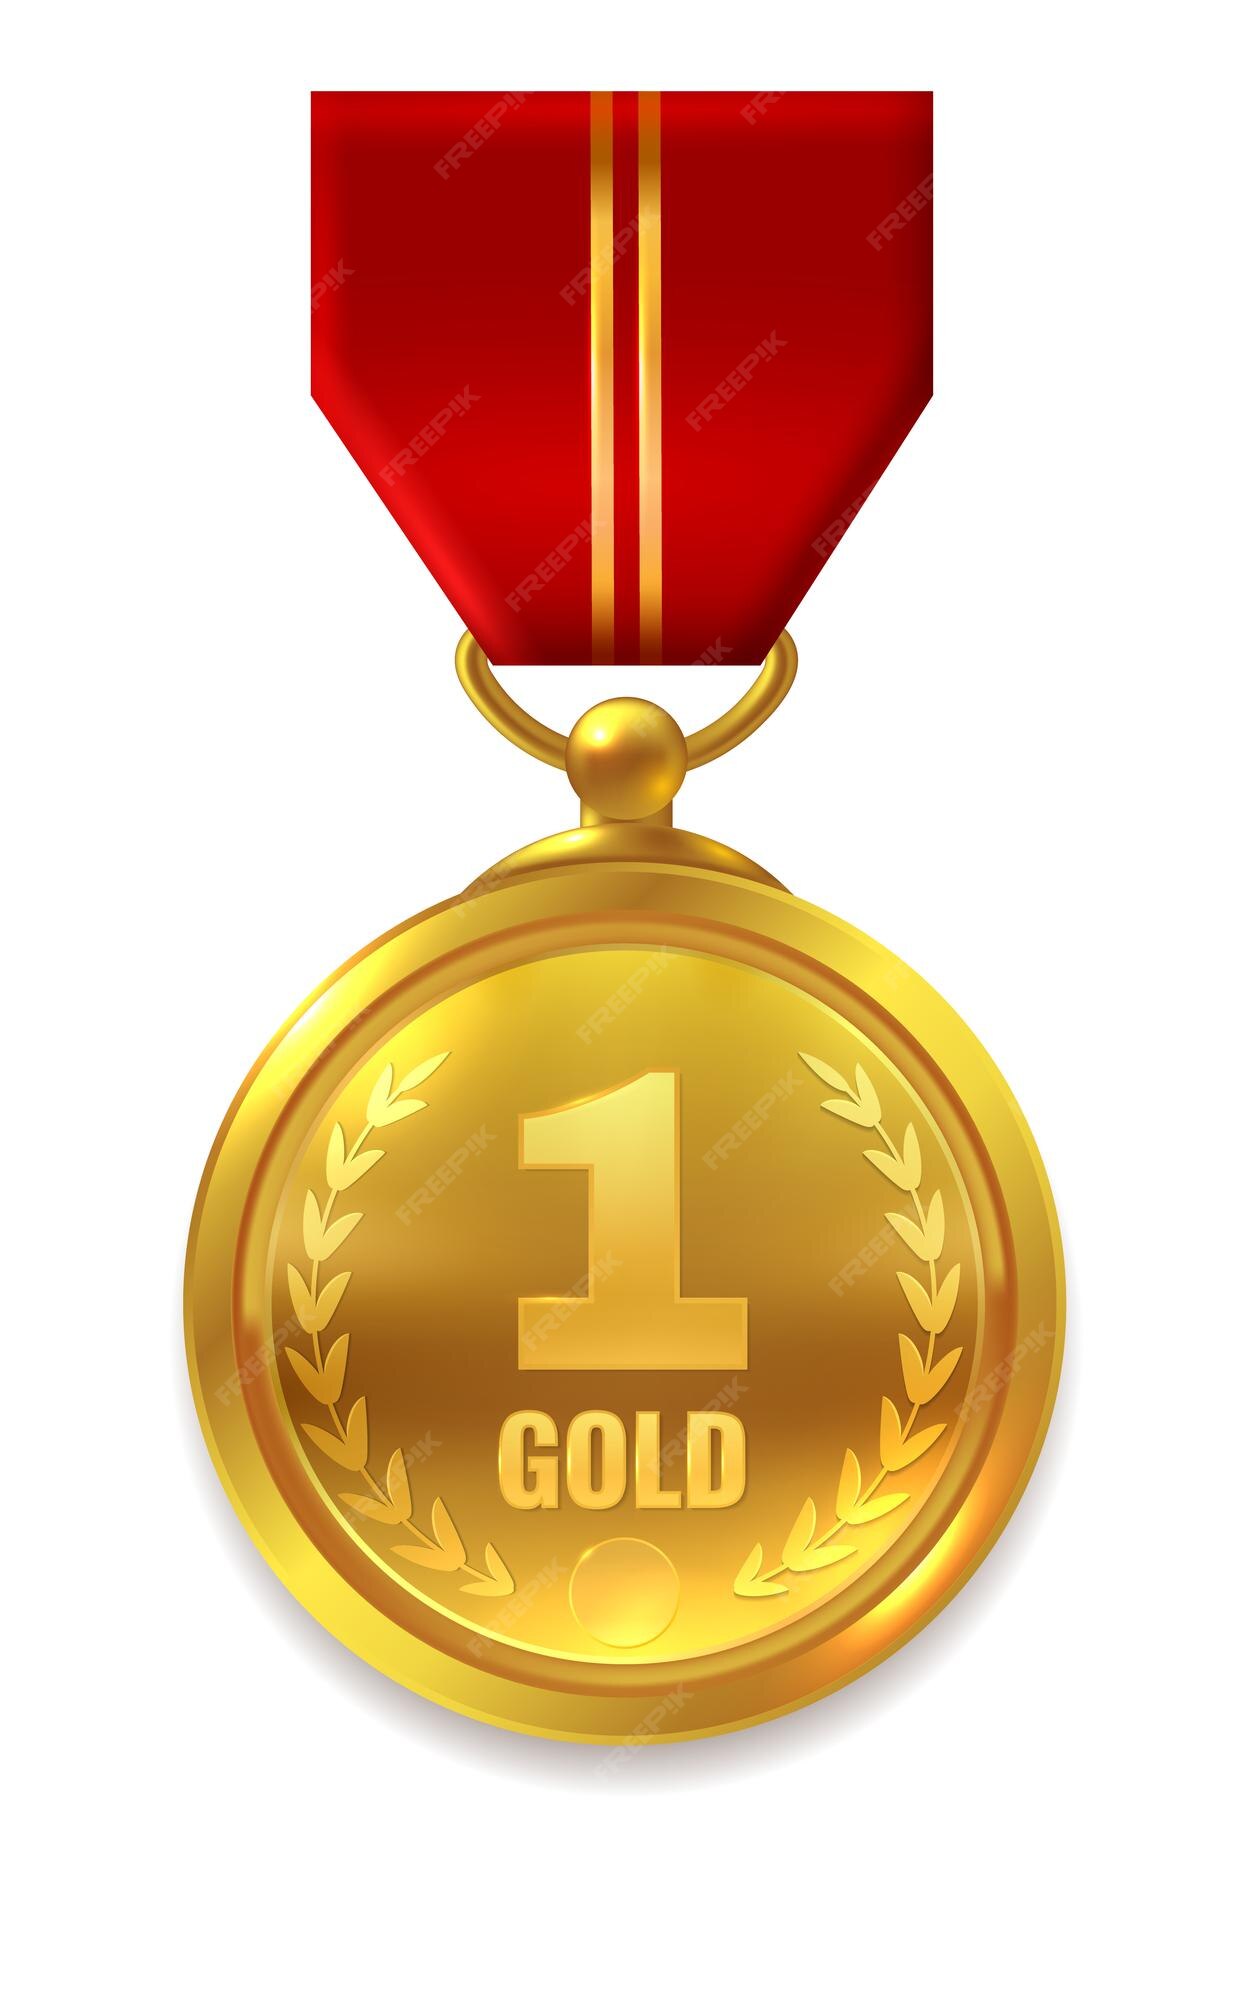 first-place-medal-shiny-golden-champion-award_176411-3202.jpg